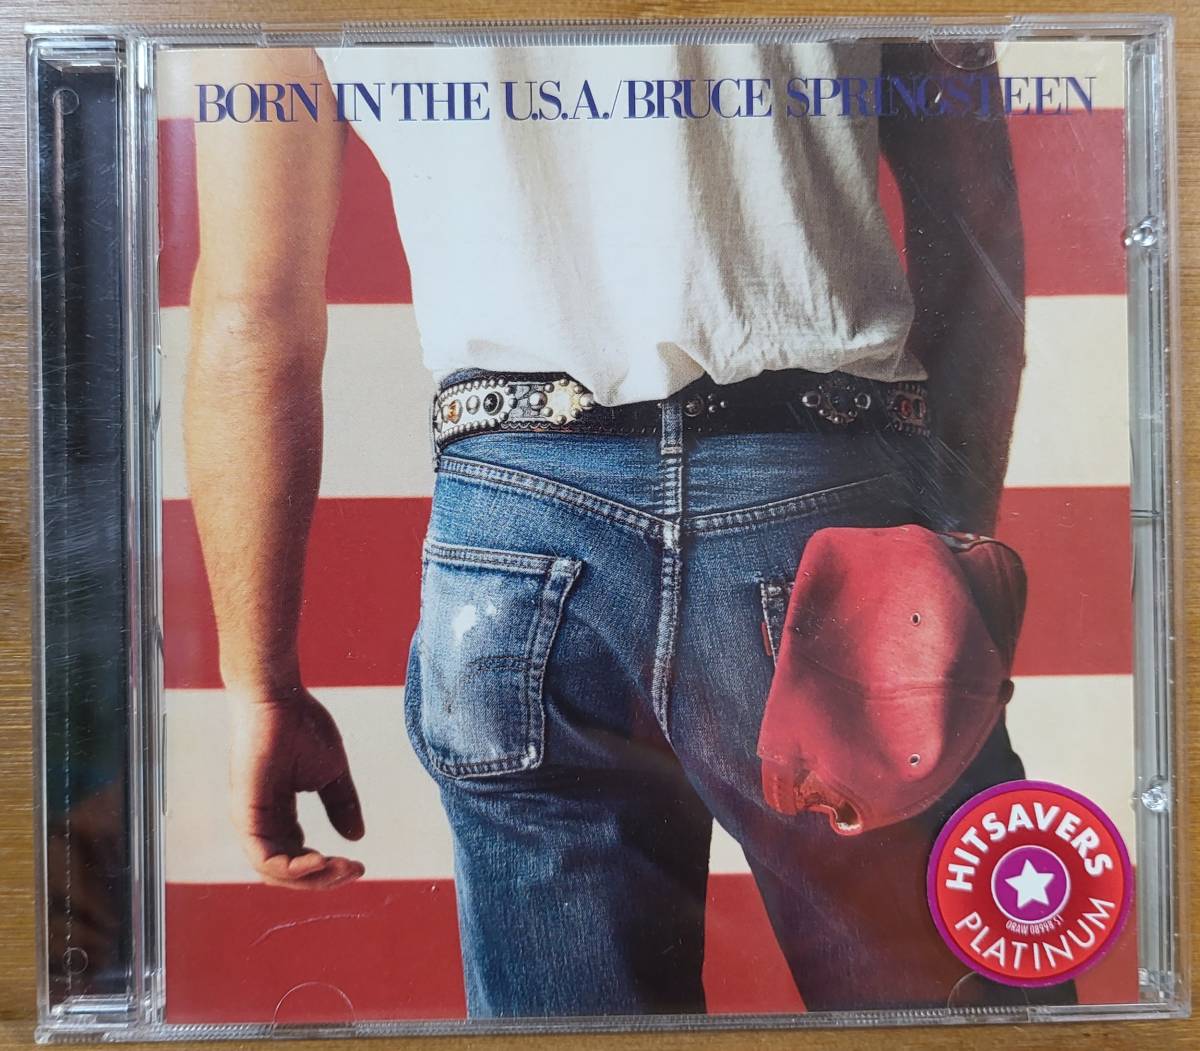 ●BRUCE SPURINGSTEEN ブルース・スプリングスティーン●BORN IN THE U.S.A. ボーン・イン・ザ・U.S.A.●CD●輸入盤 の画像1